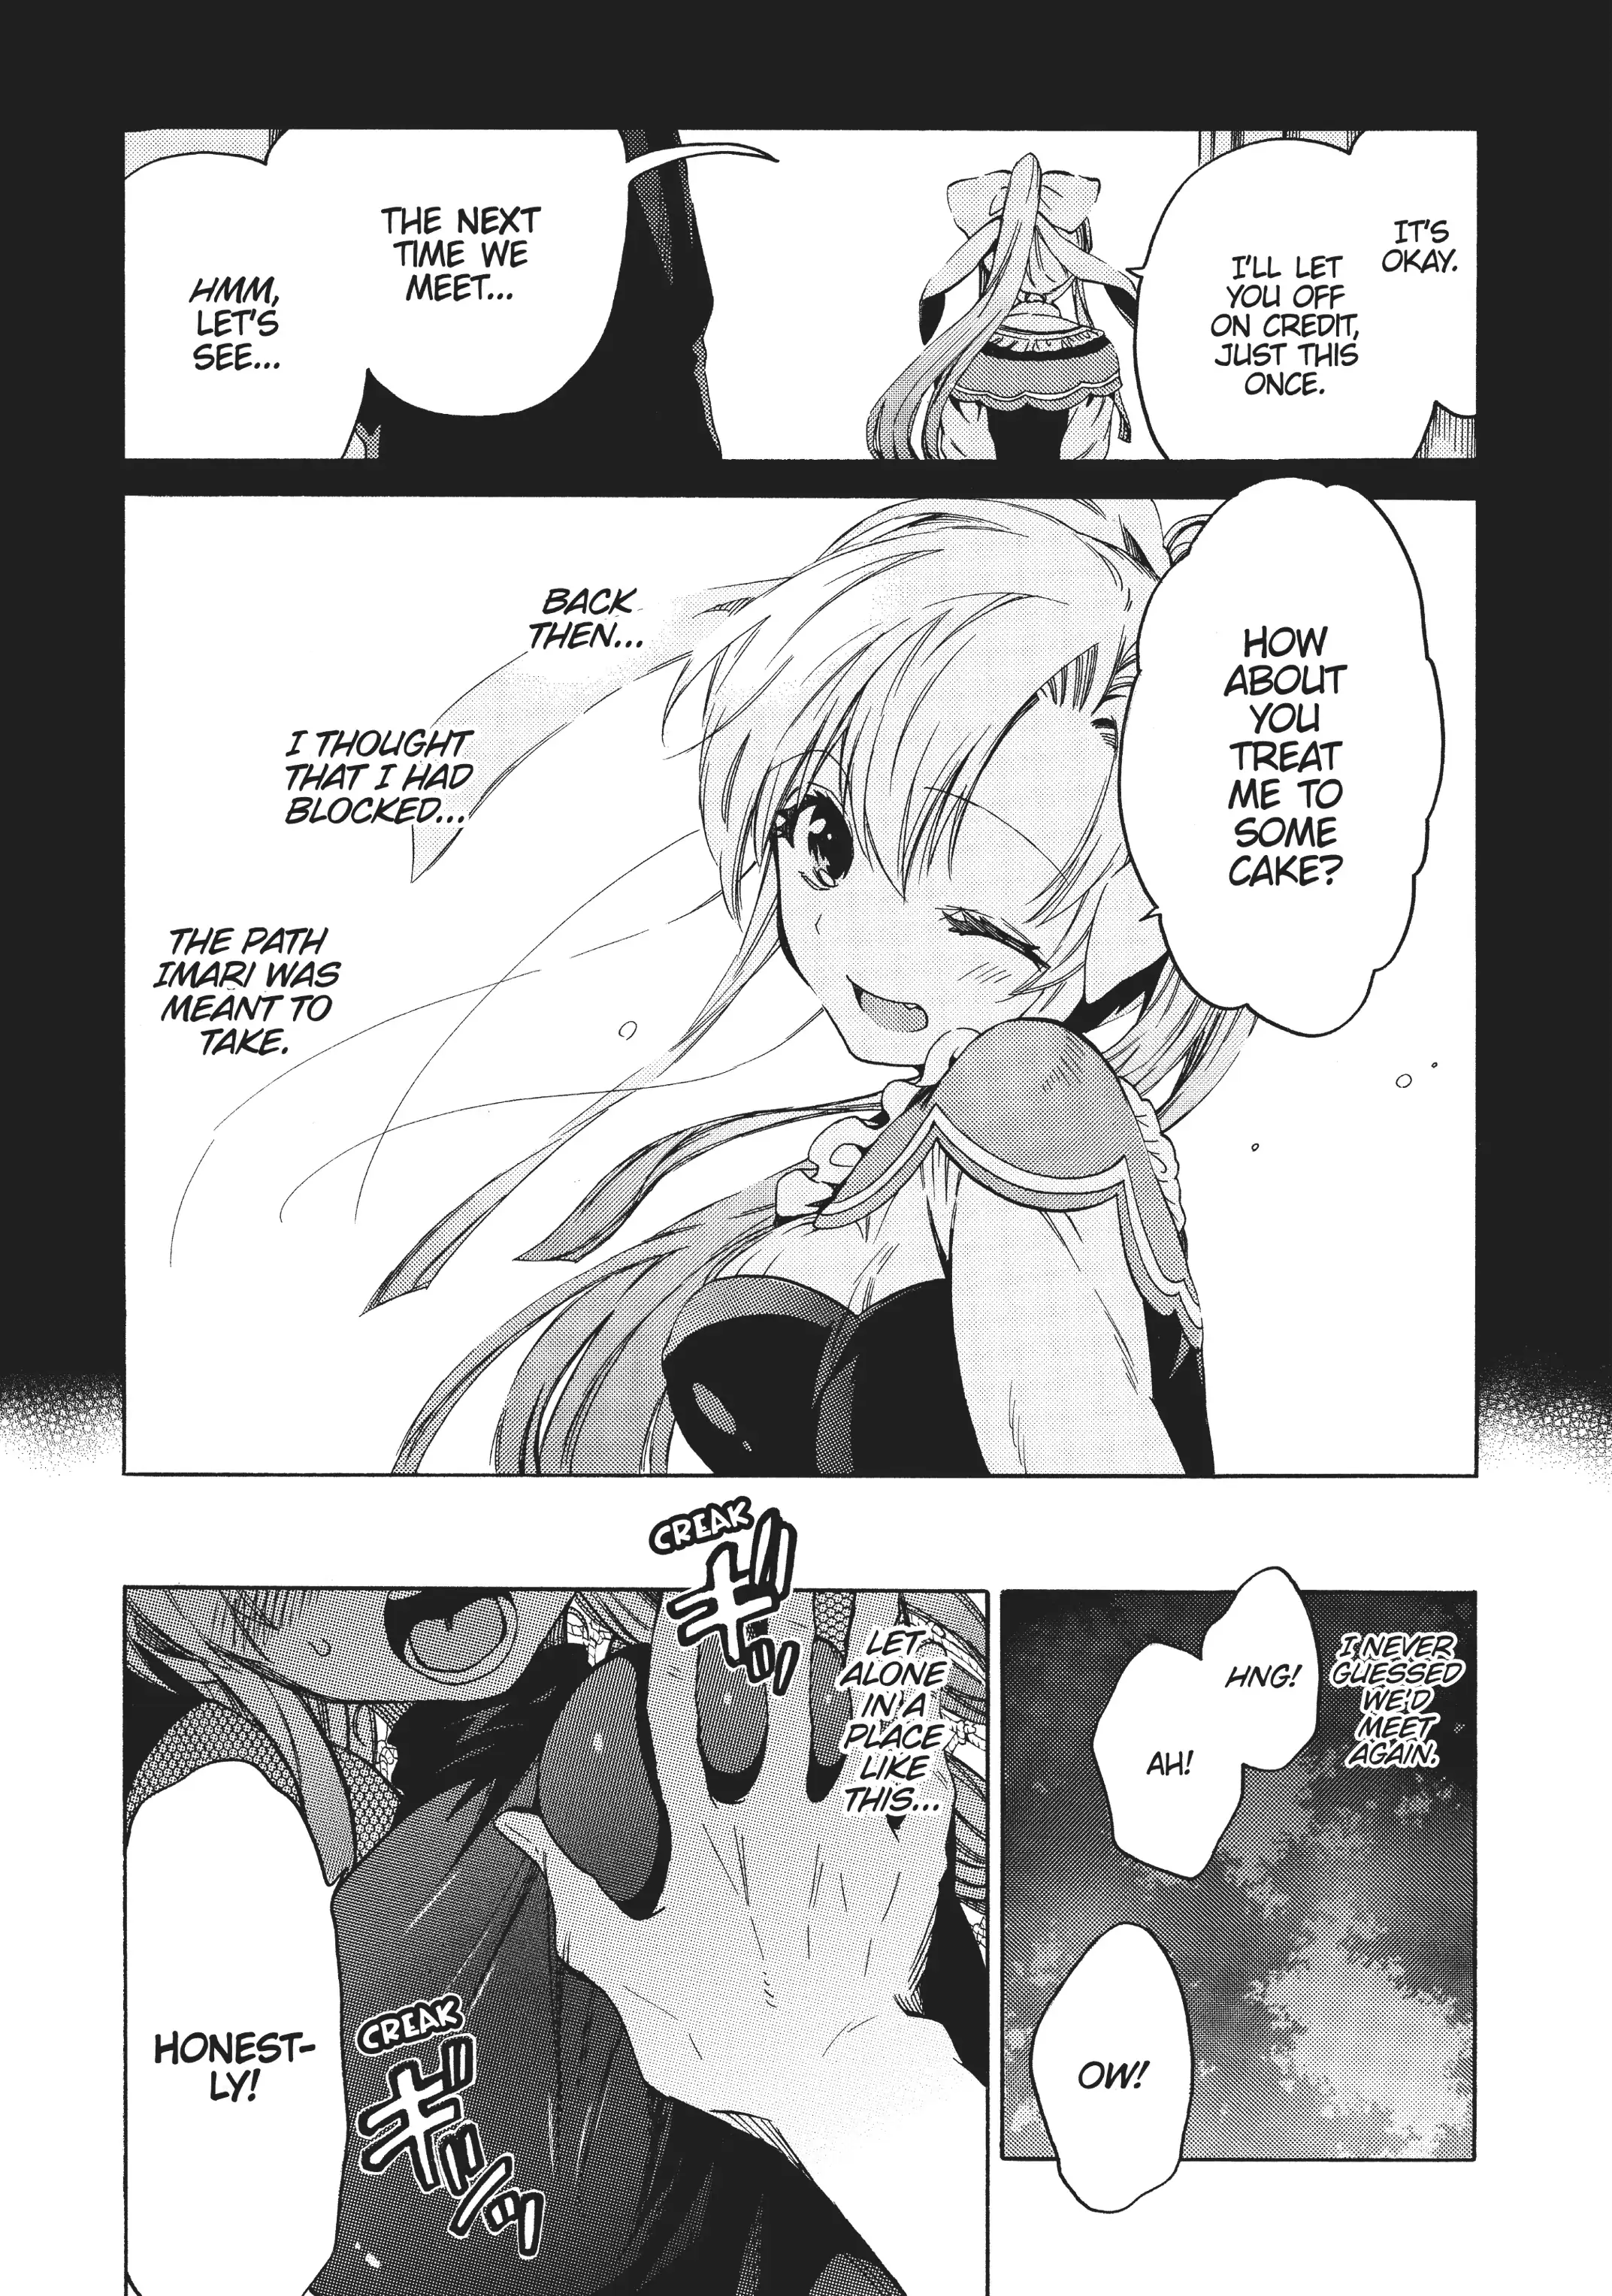 Read Absolute Duo Chapter 2 : To This shield Ii on Mangakakalot